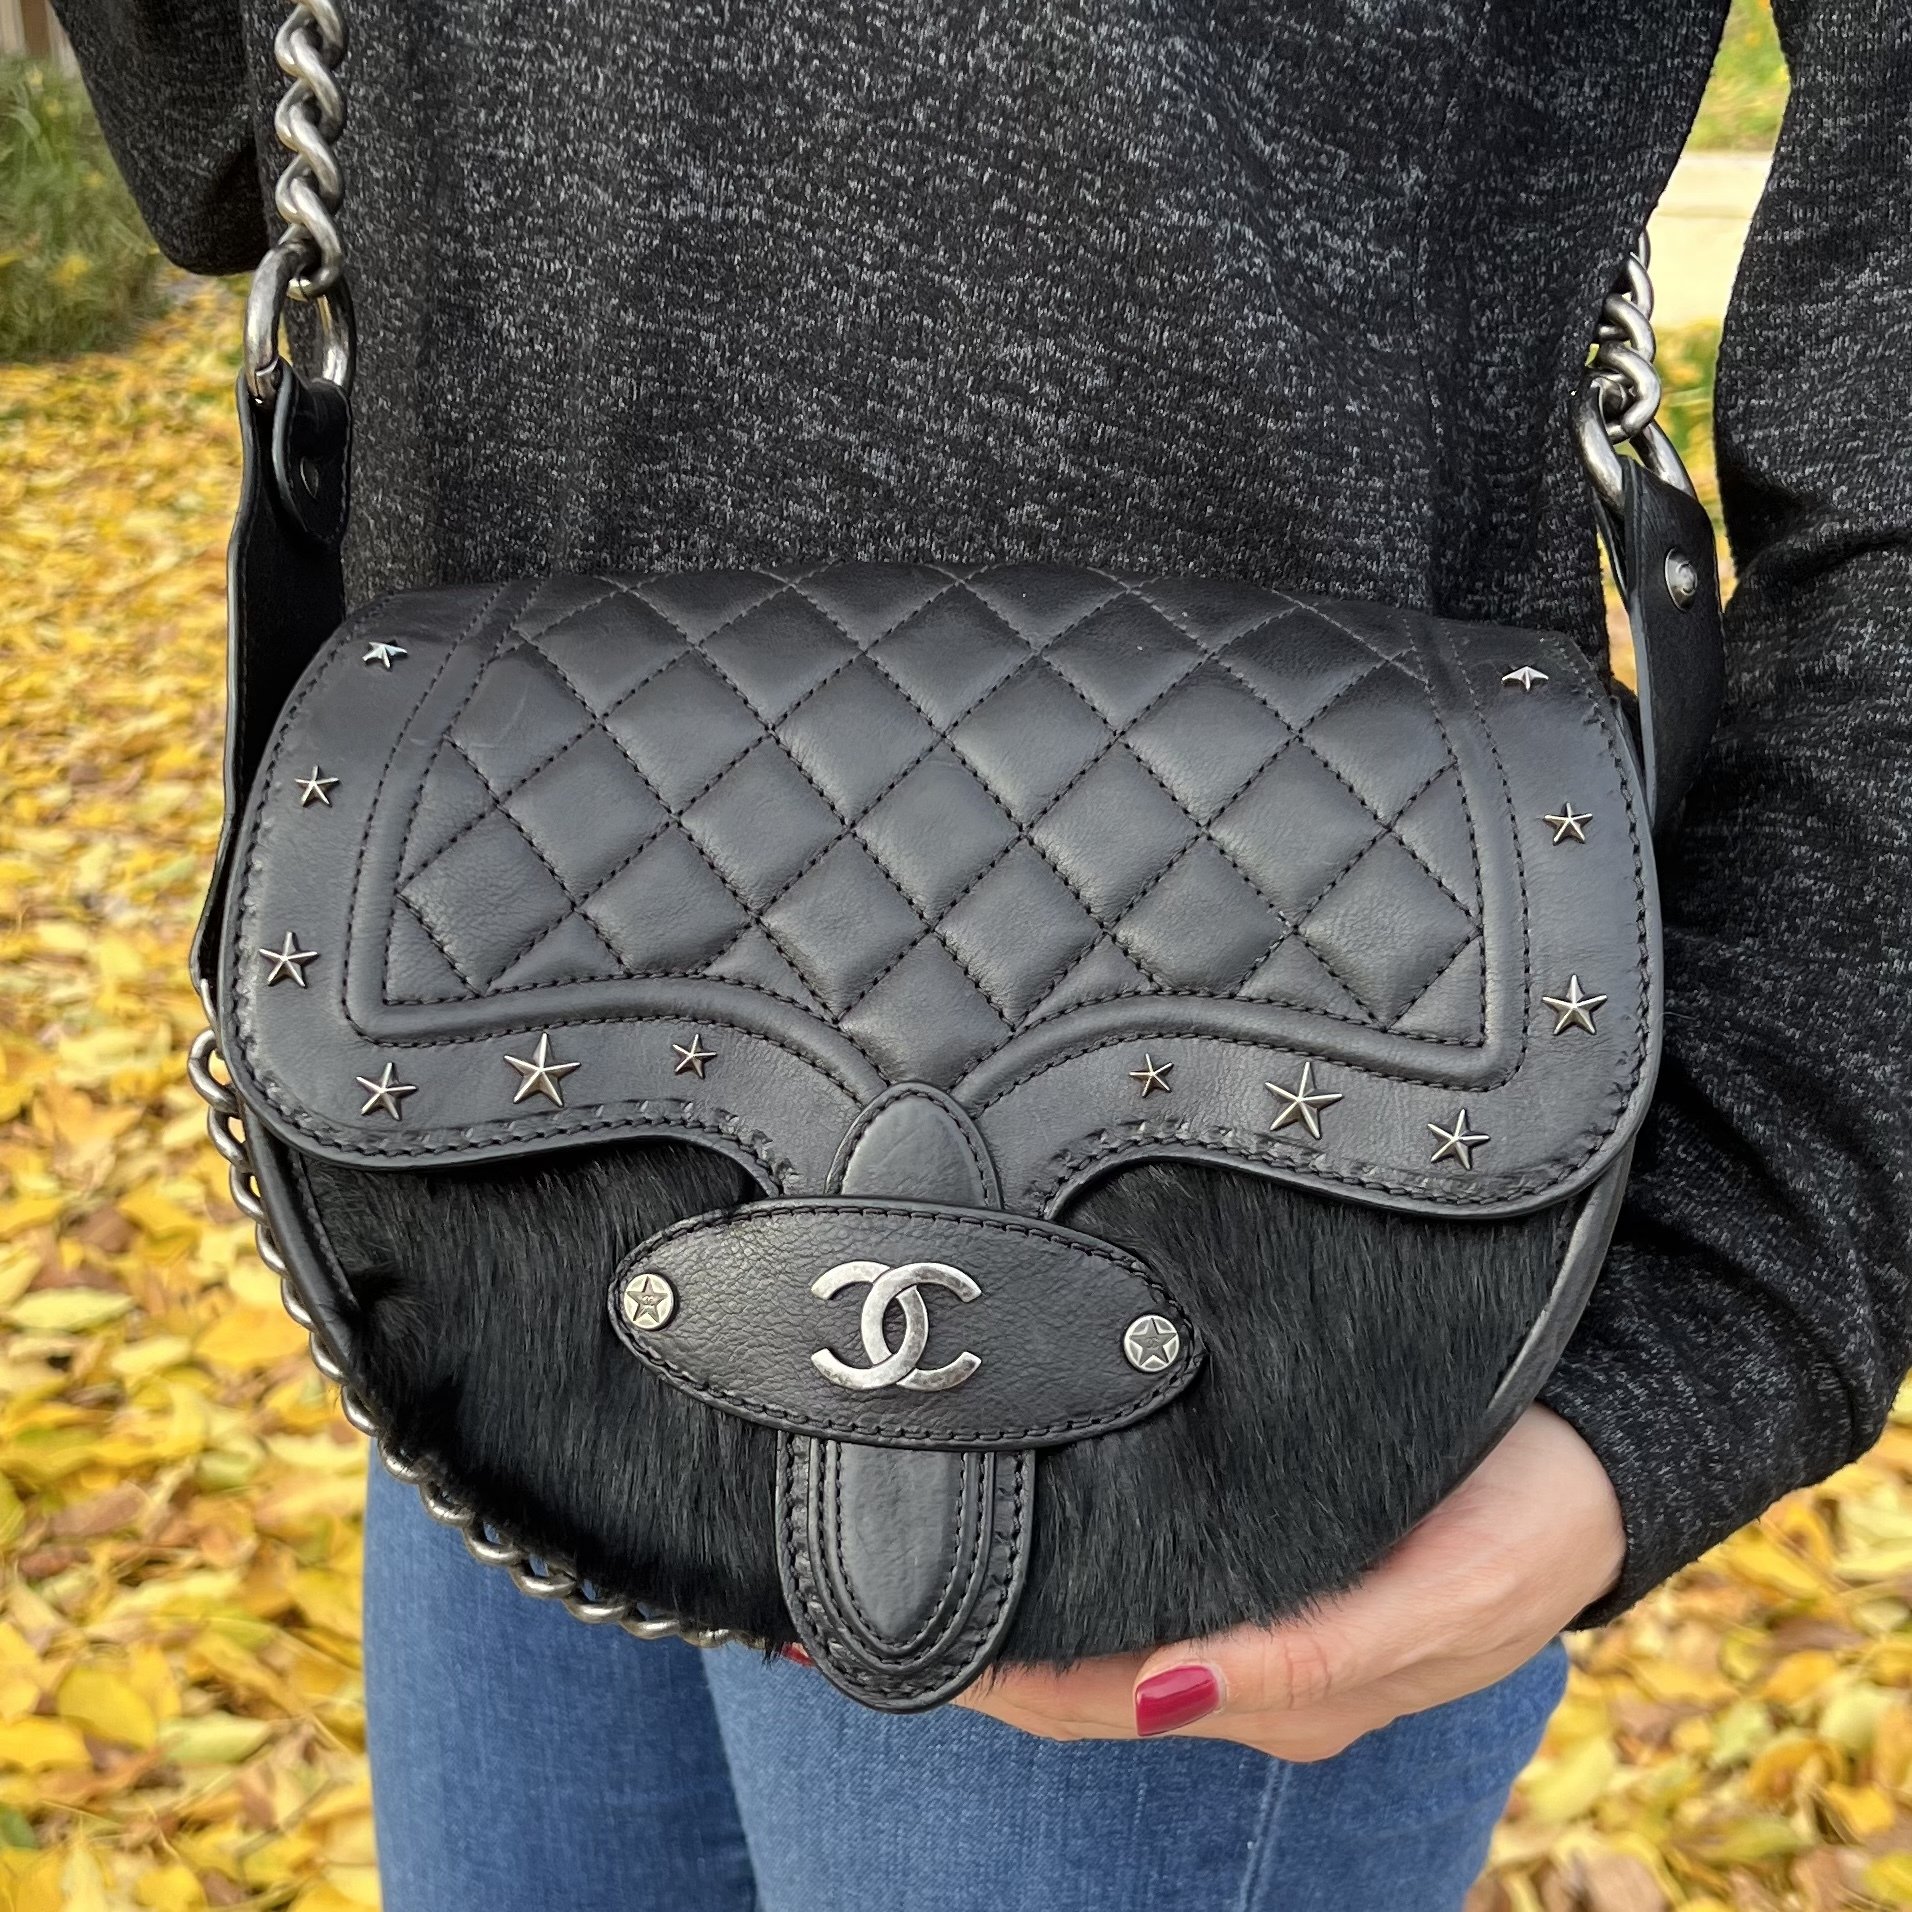 Chanel  Black Quilted Leather Crossbody Uniform Bag  VSP Consignment